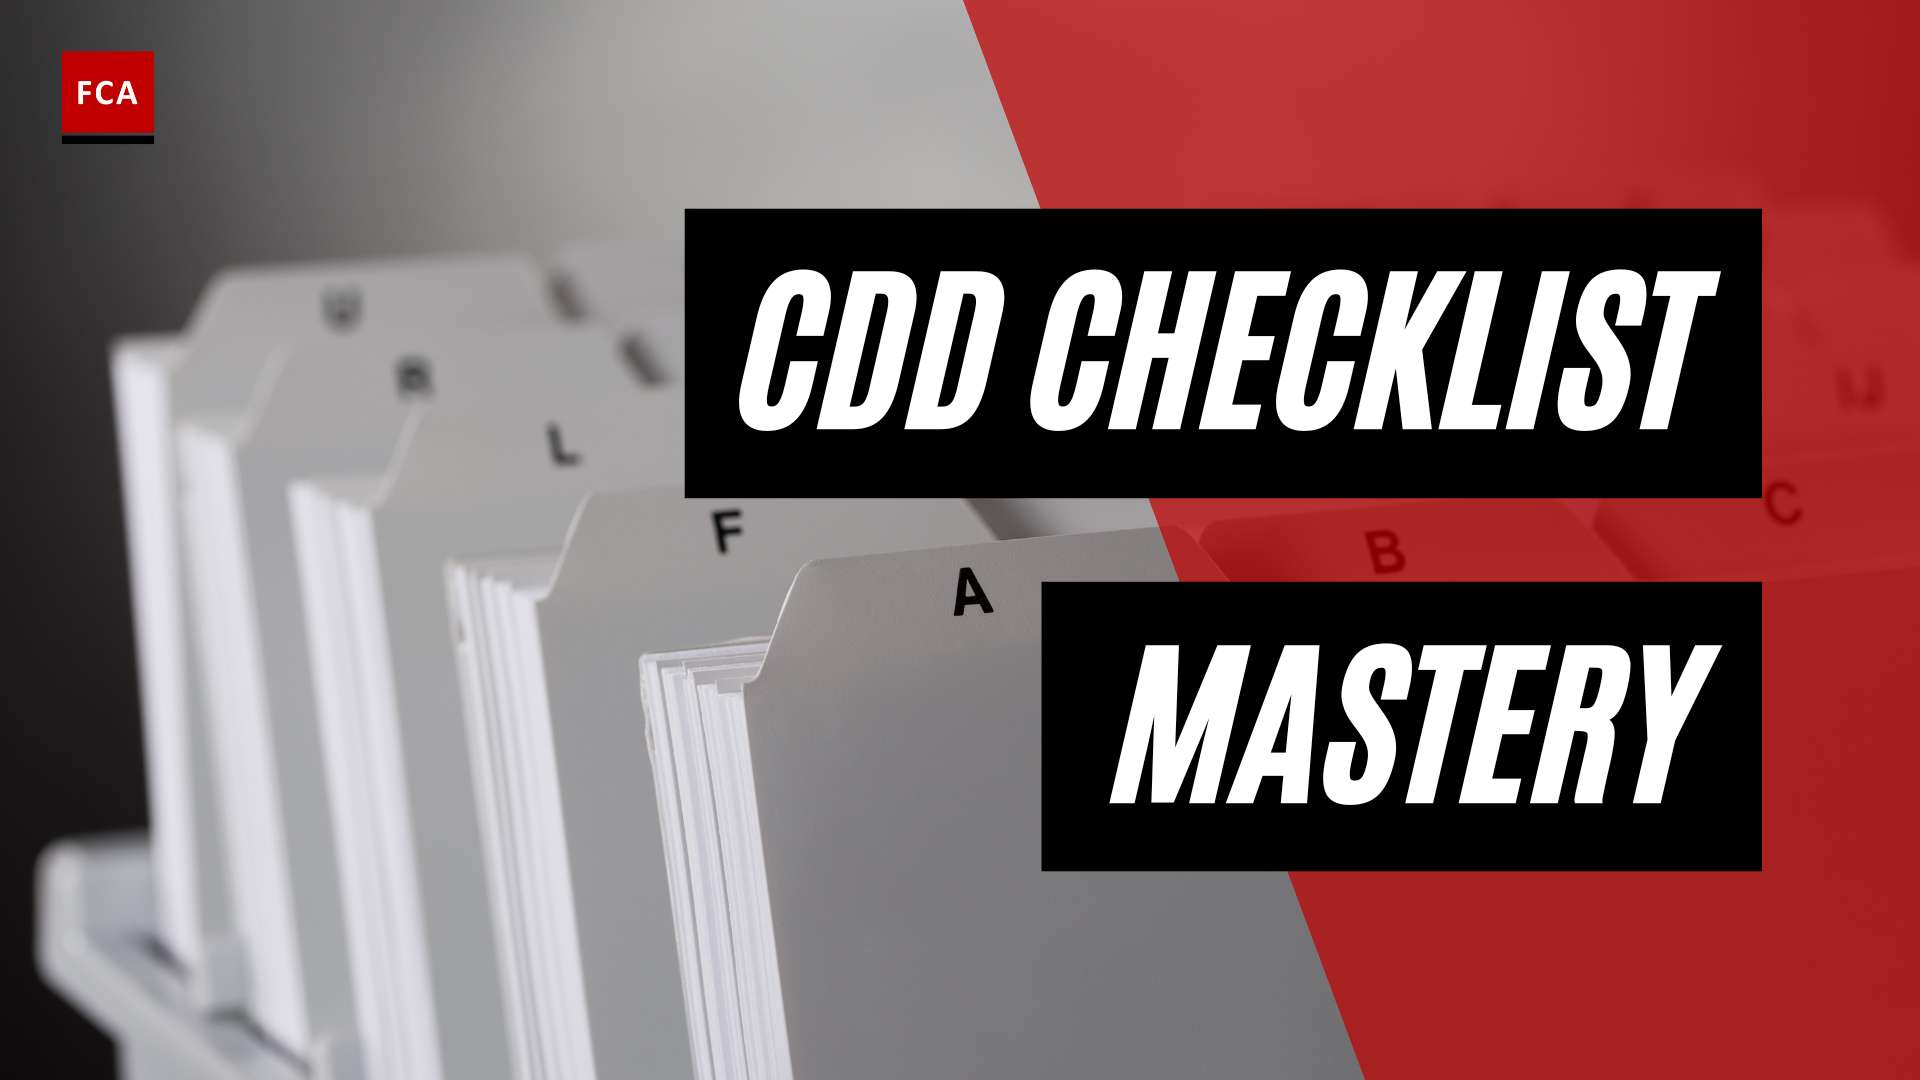 Achieving Aml Excellence: The Ultimate Guide To Cdd Checklists